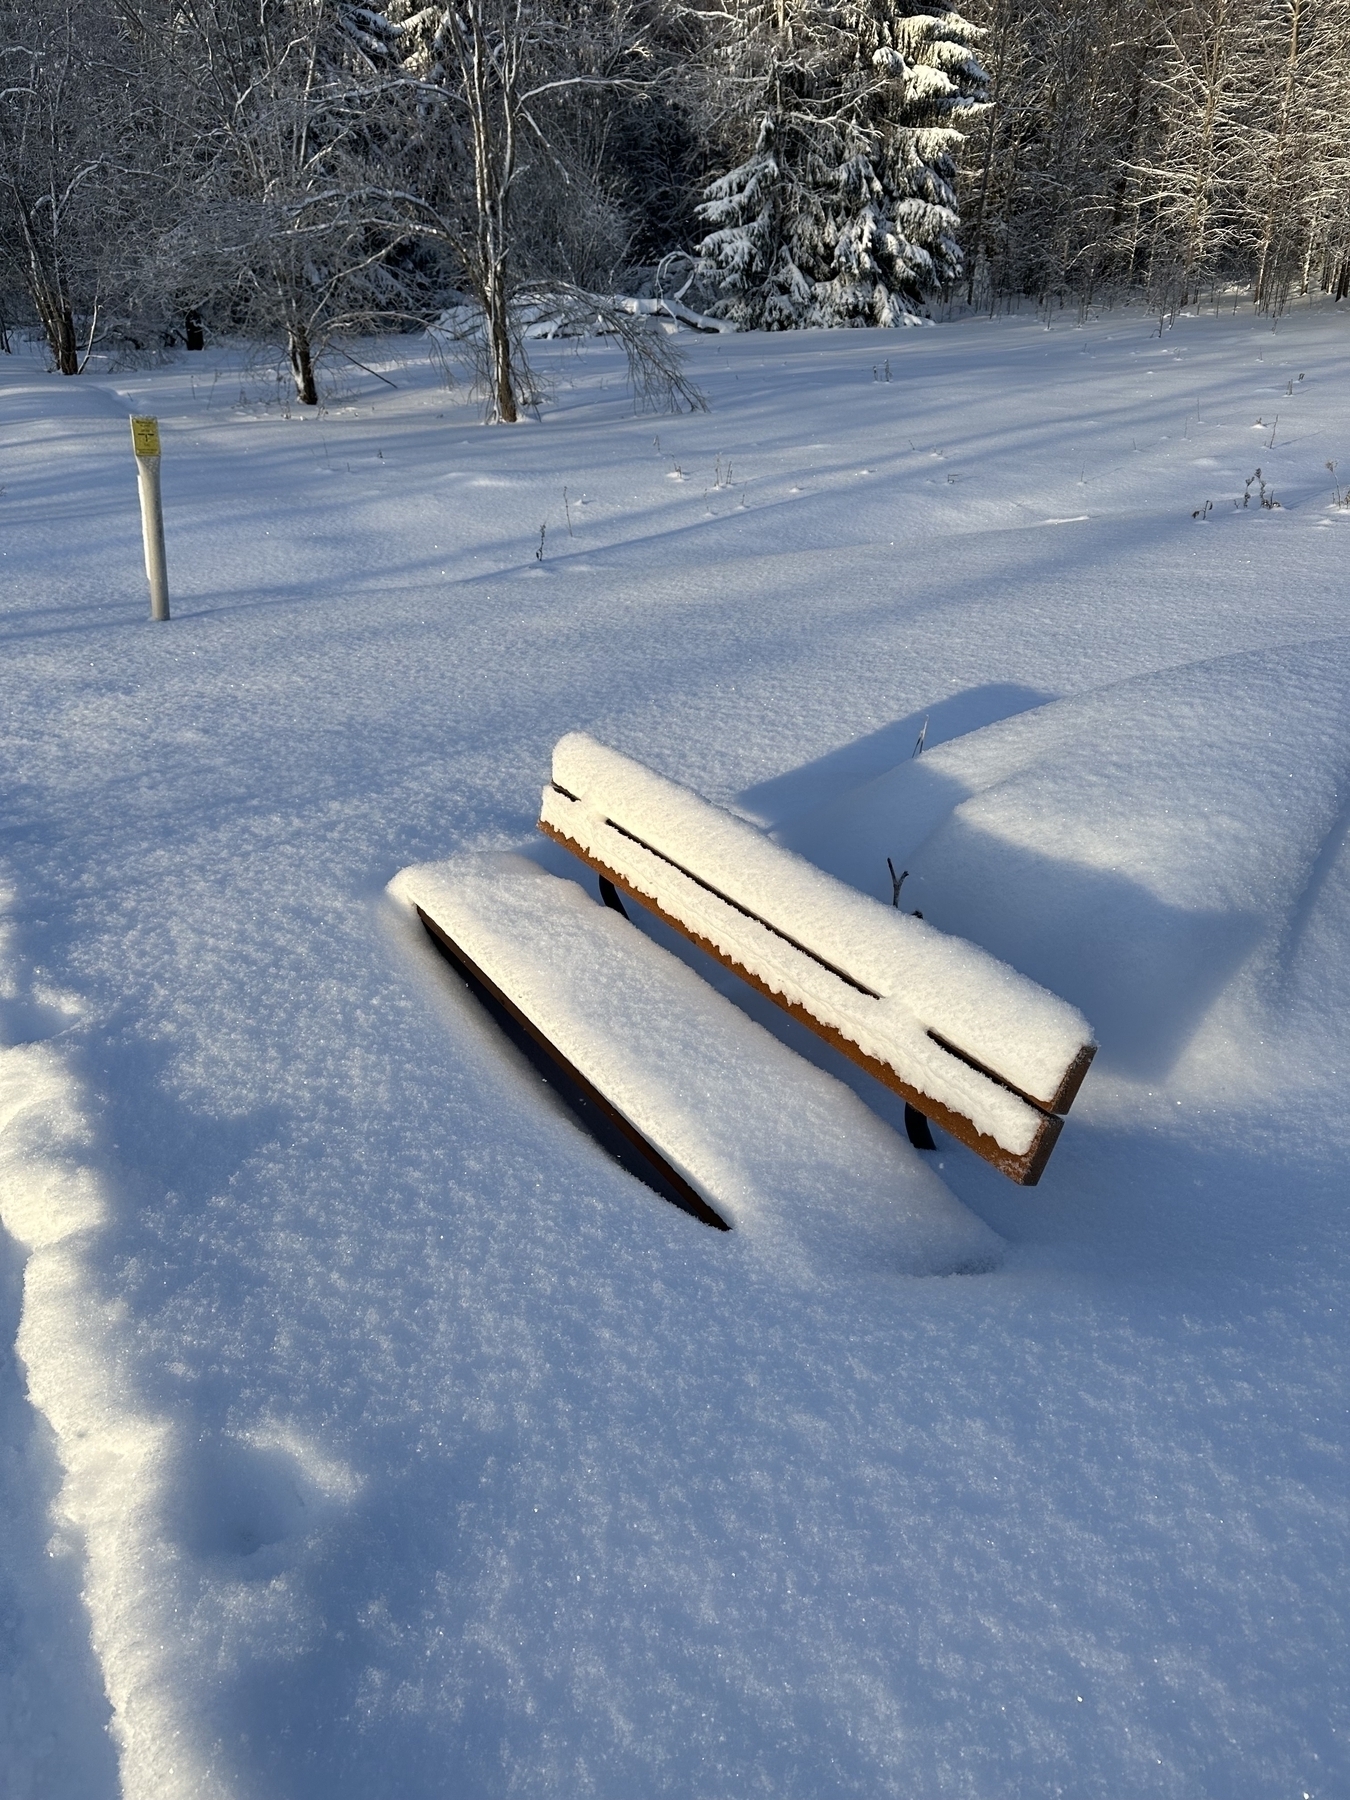 Park bench pretty much eaten up by snow. Snow reaches the seat level